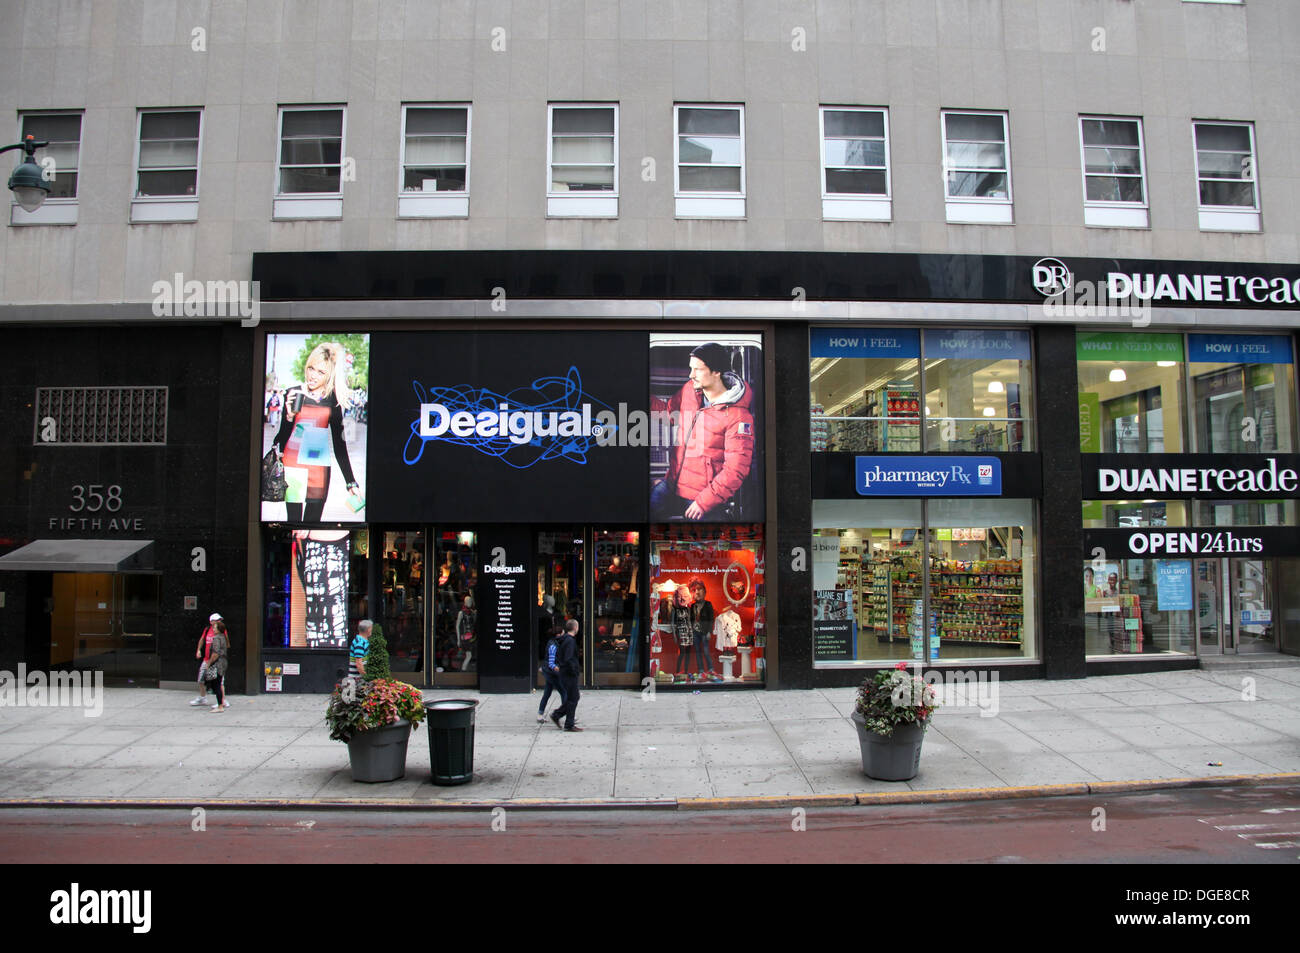 Desigual Store on 5th Avenue in New York City Stock Photo - Alamy